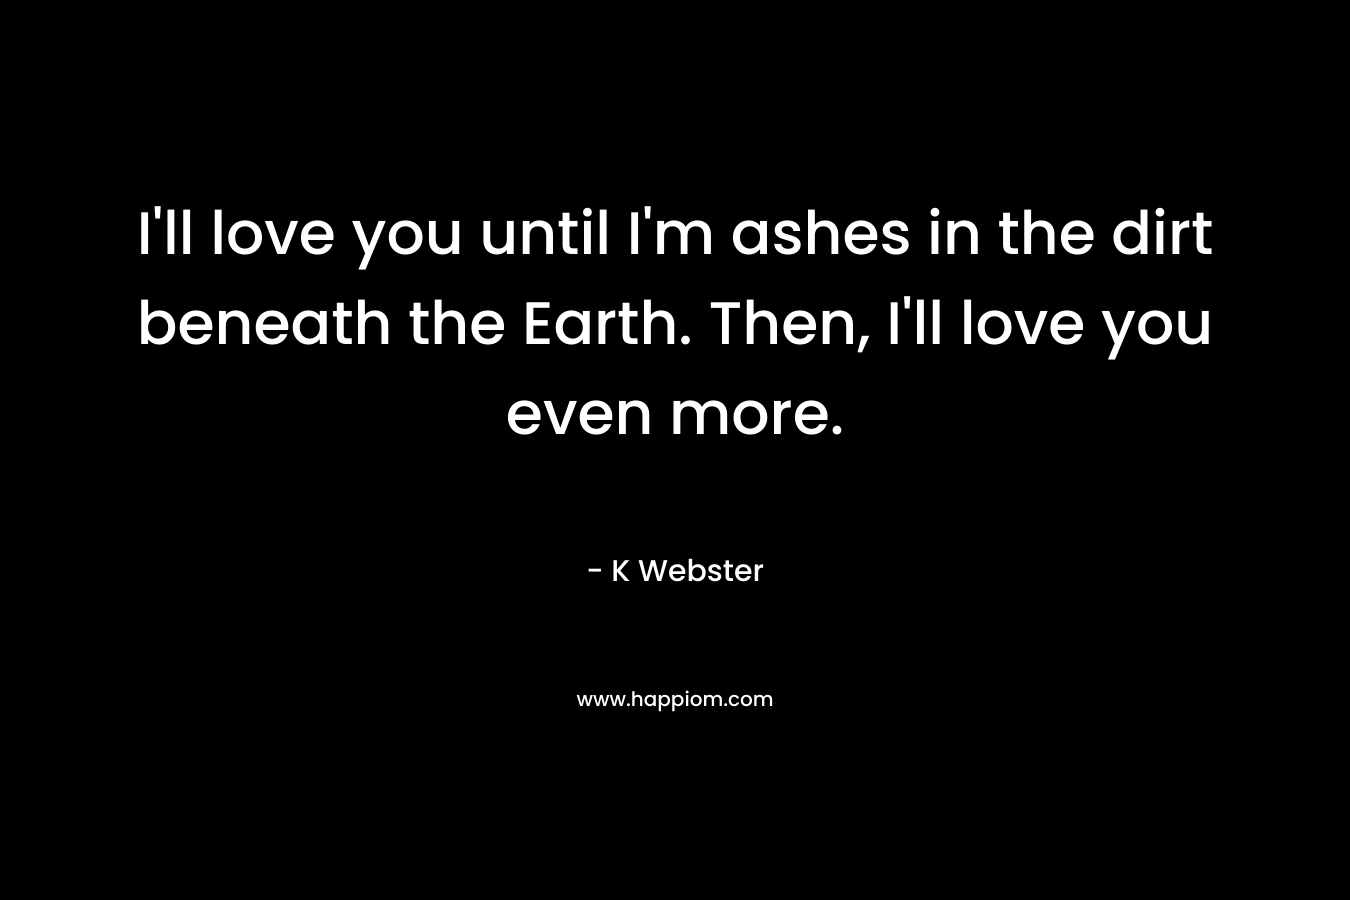 I'll love you until I'm ashes in the dirt beneath the Earth. Then, I'll love you even more.